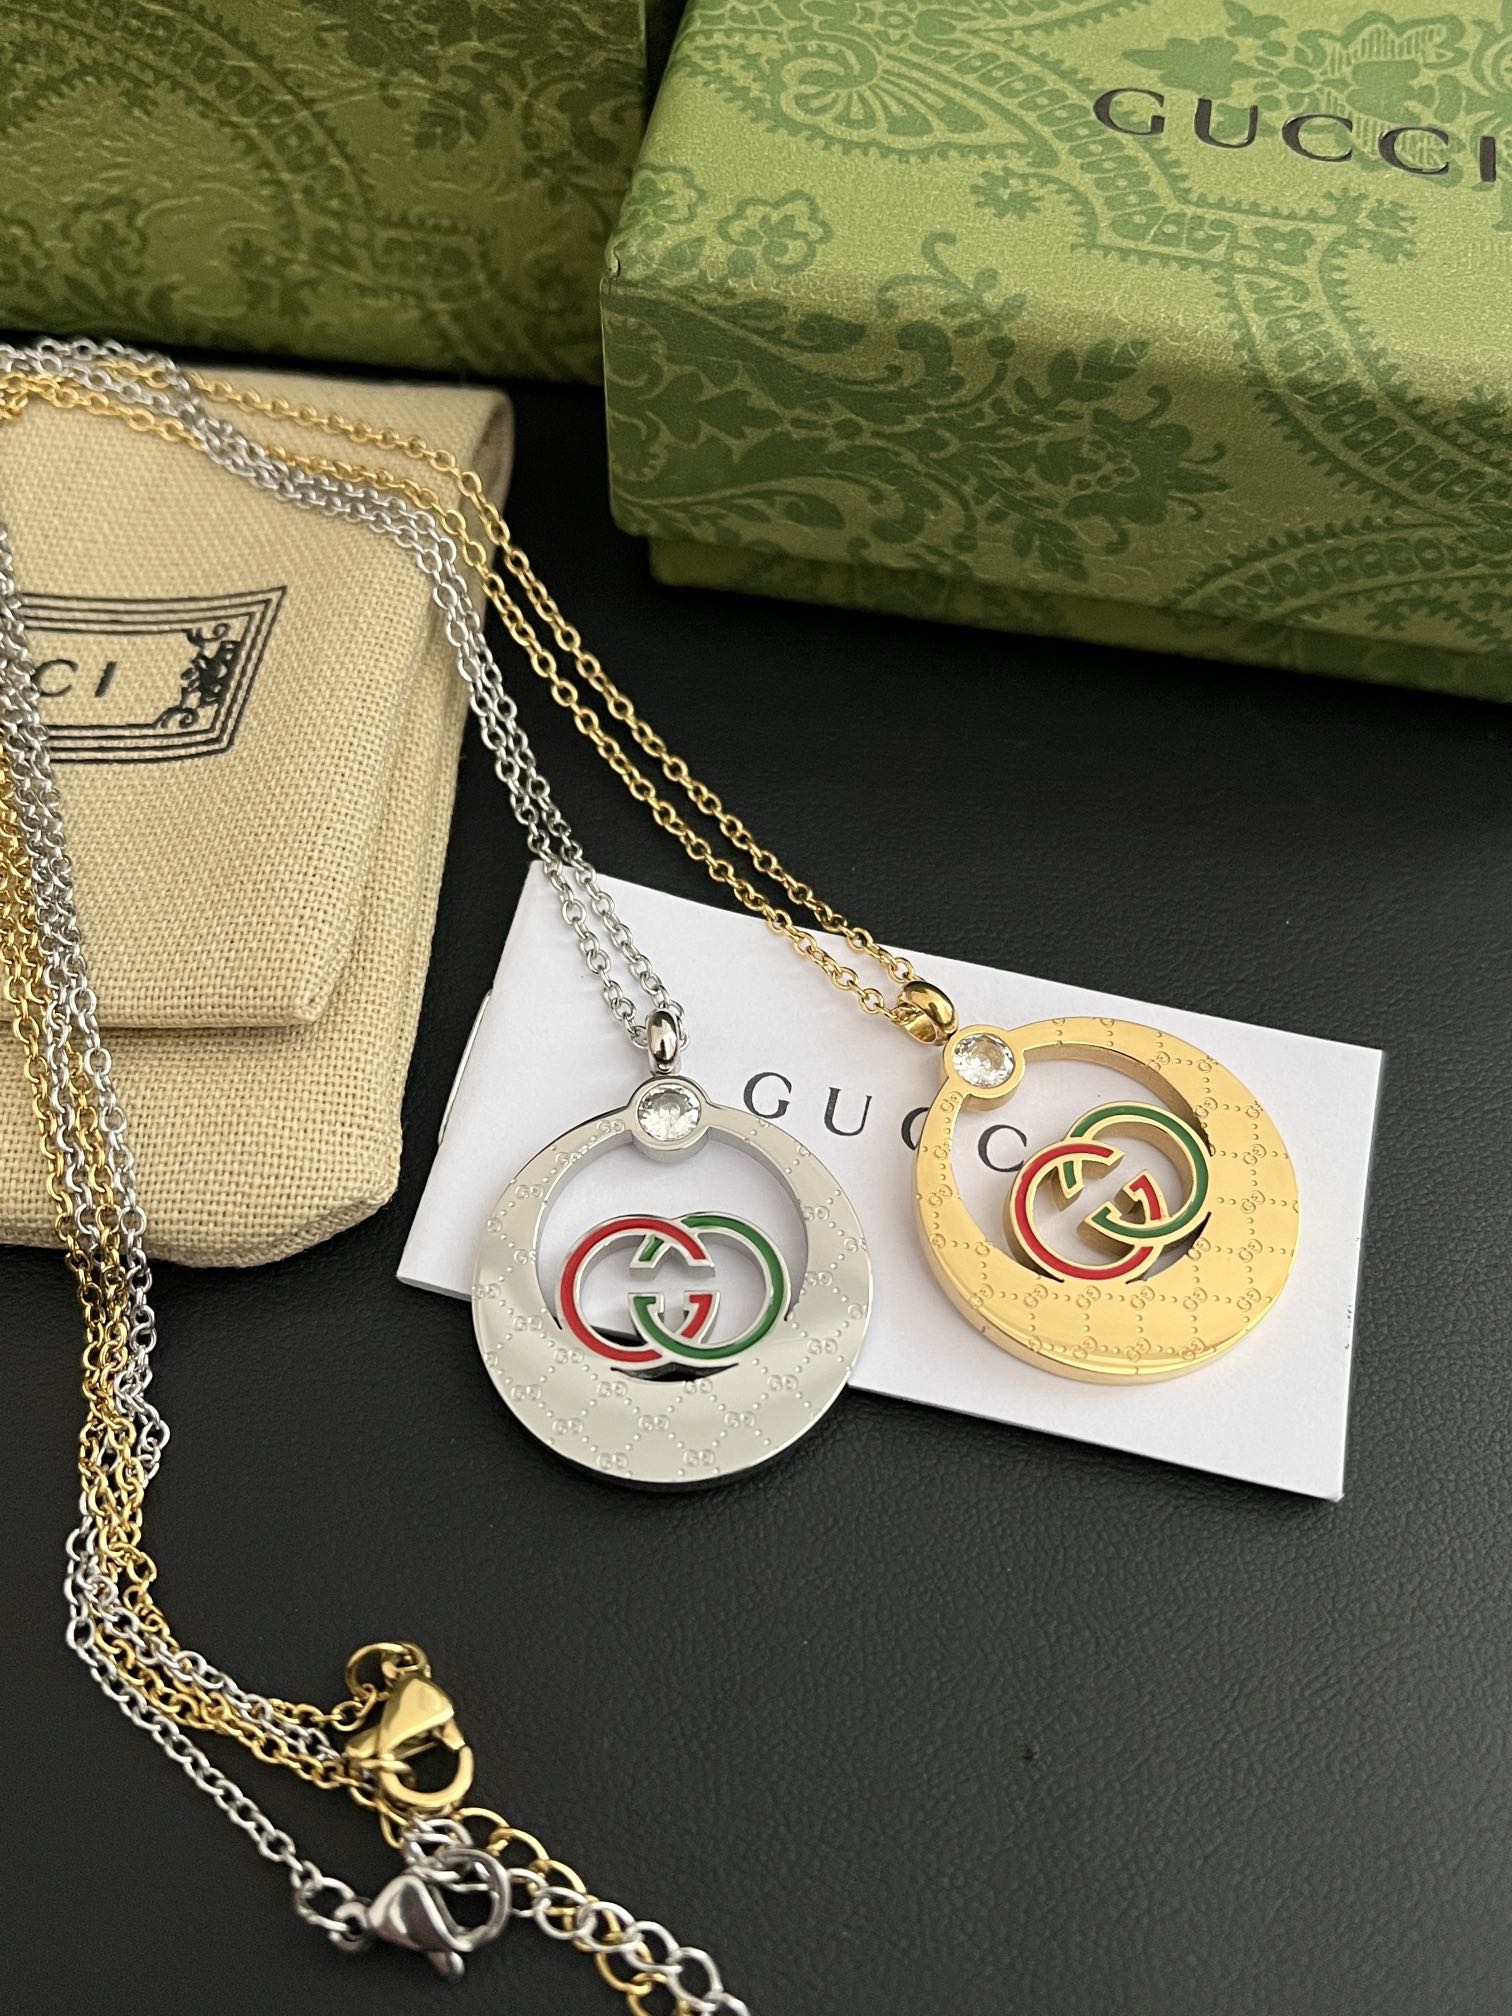 X575 Gucci necklace 113526